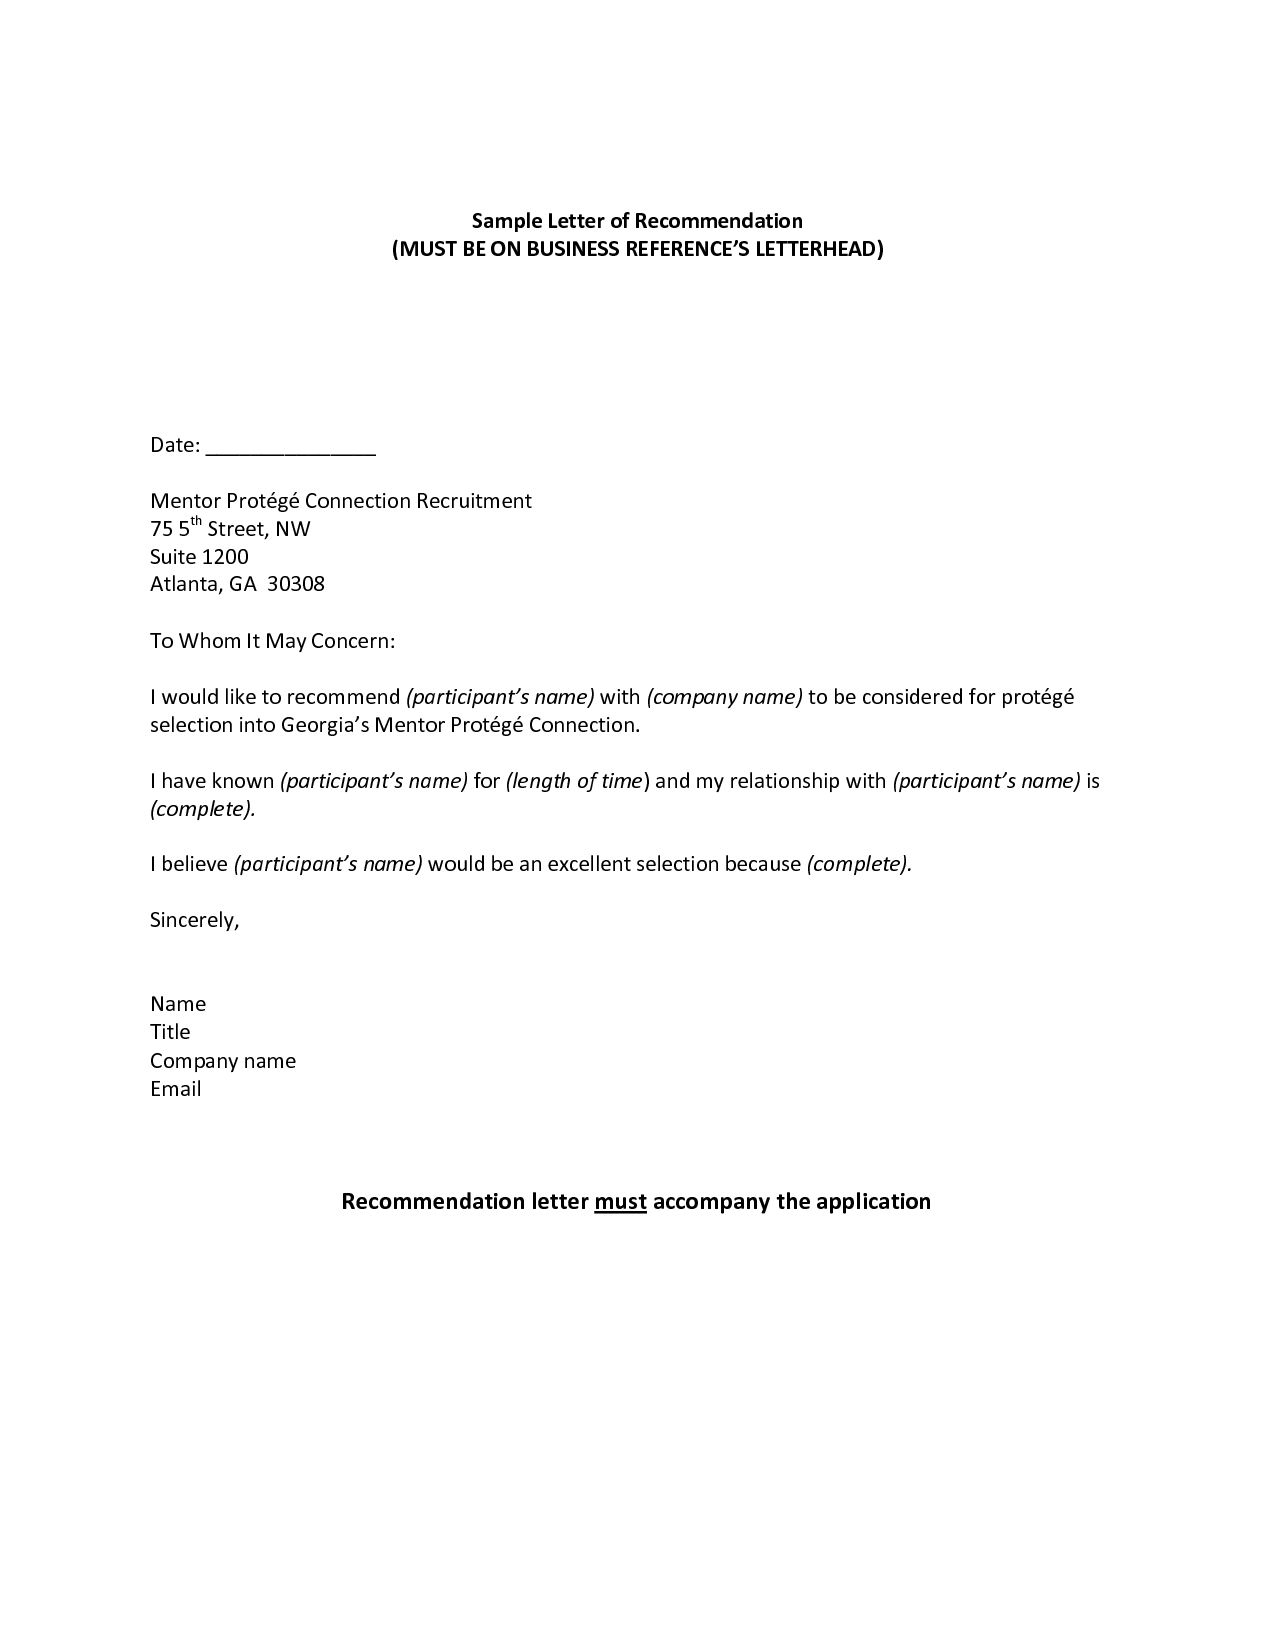 Professional Reference Sample Recommendation Letter Jos with regard to dimensions 1275 X 1650